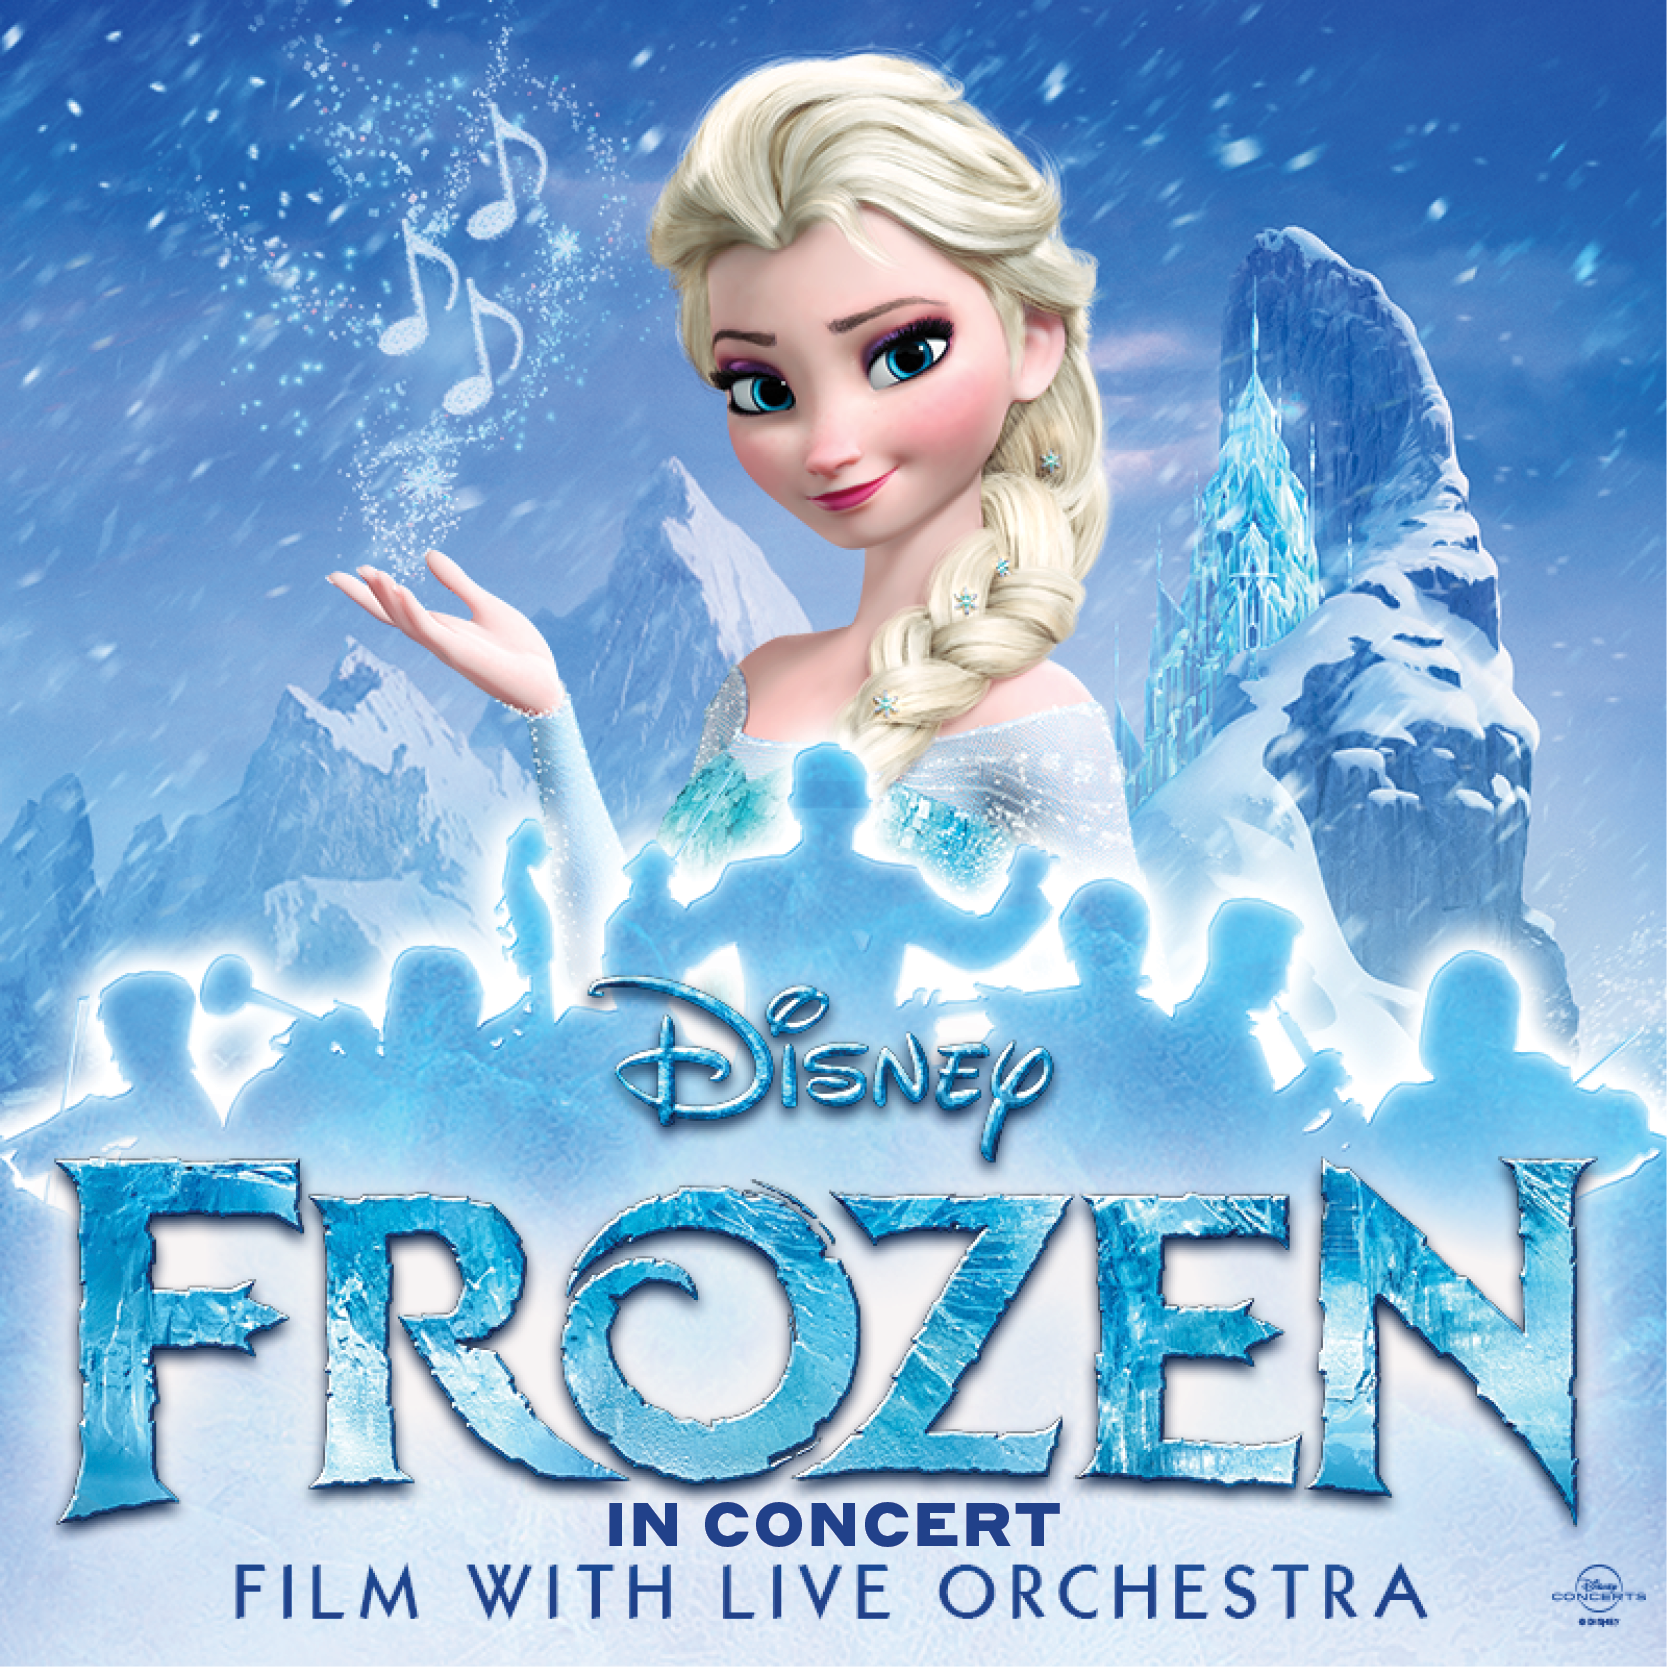 Disney's Frozen in Concert  Film with Live Orchestra - Born Buffalo